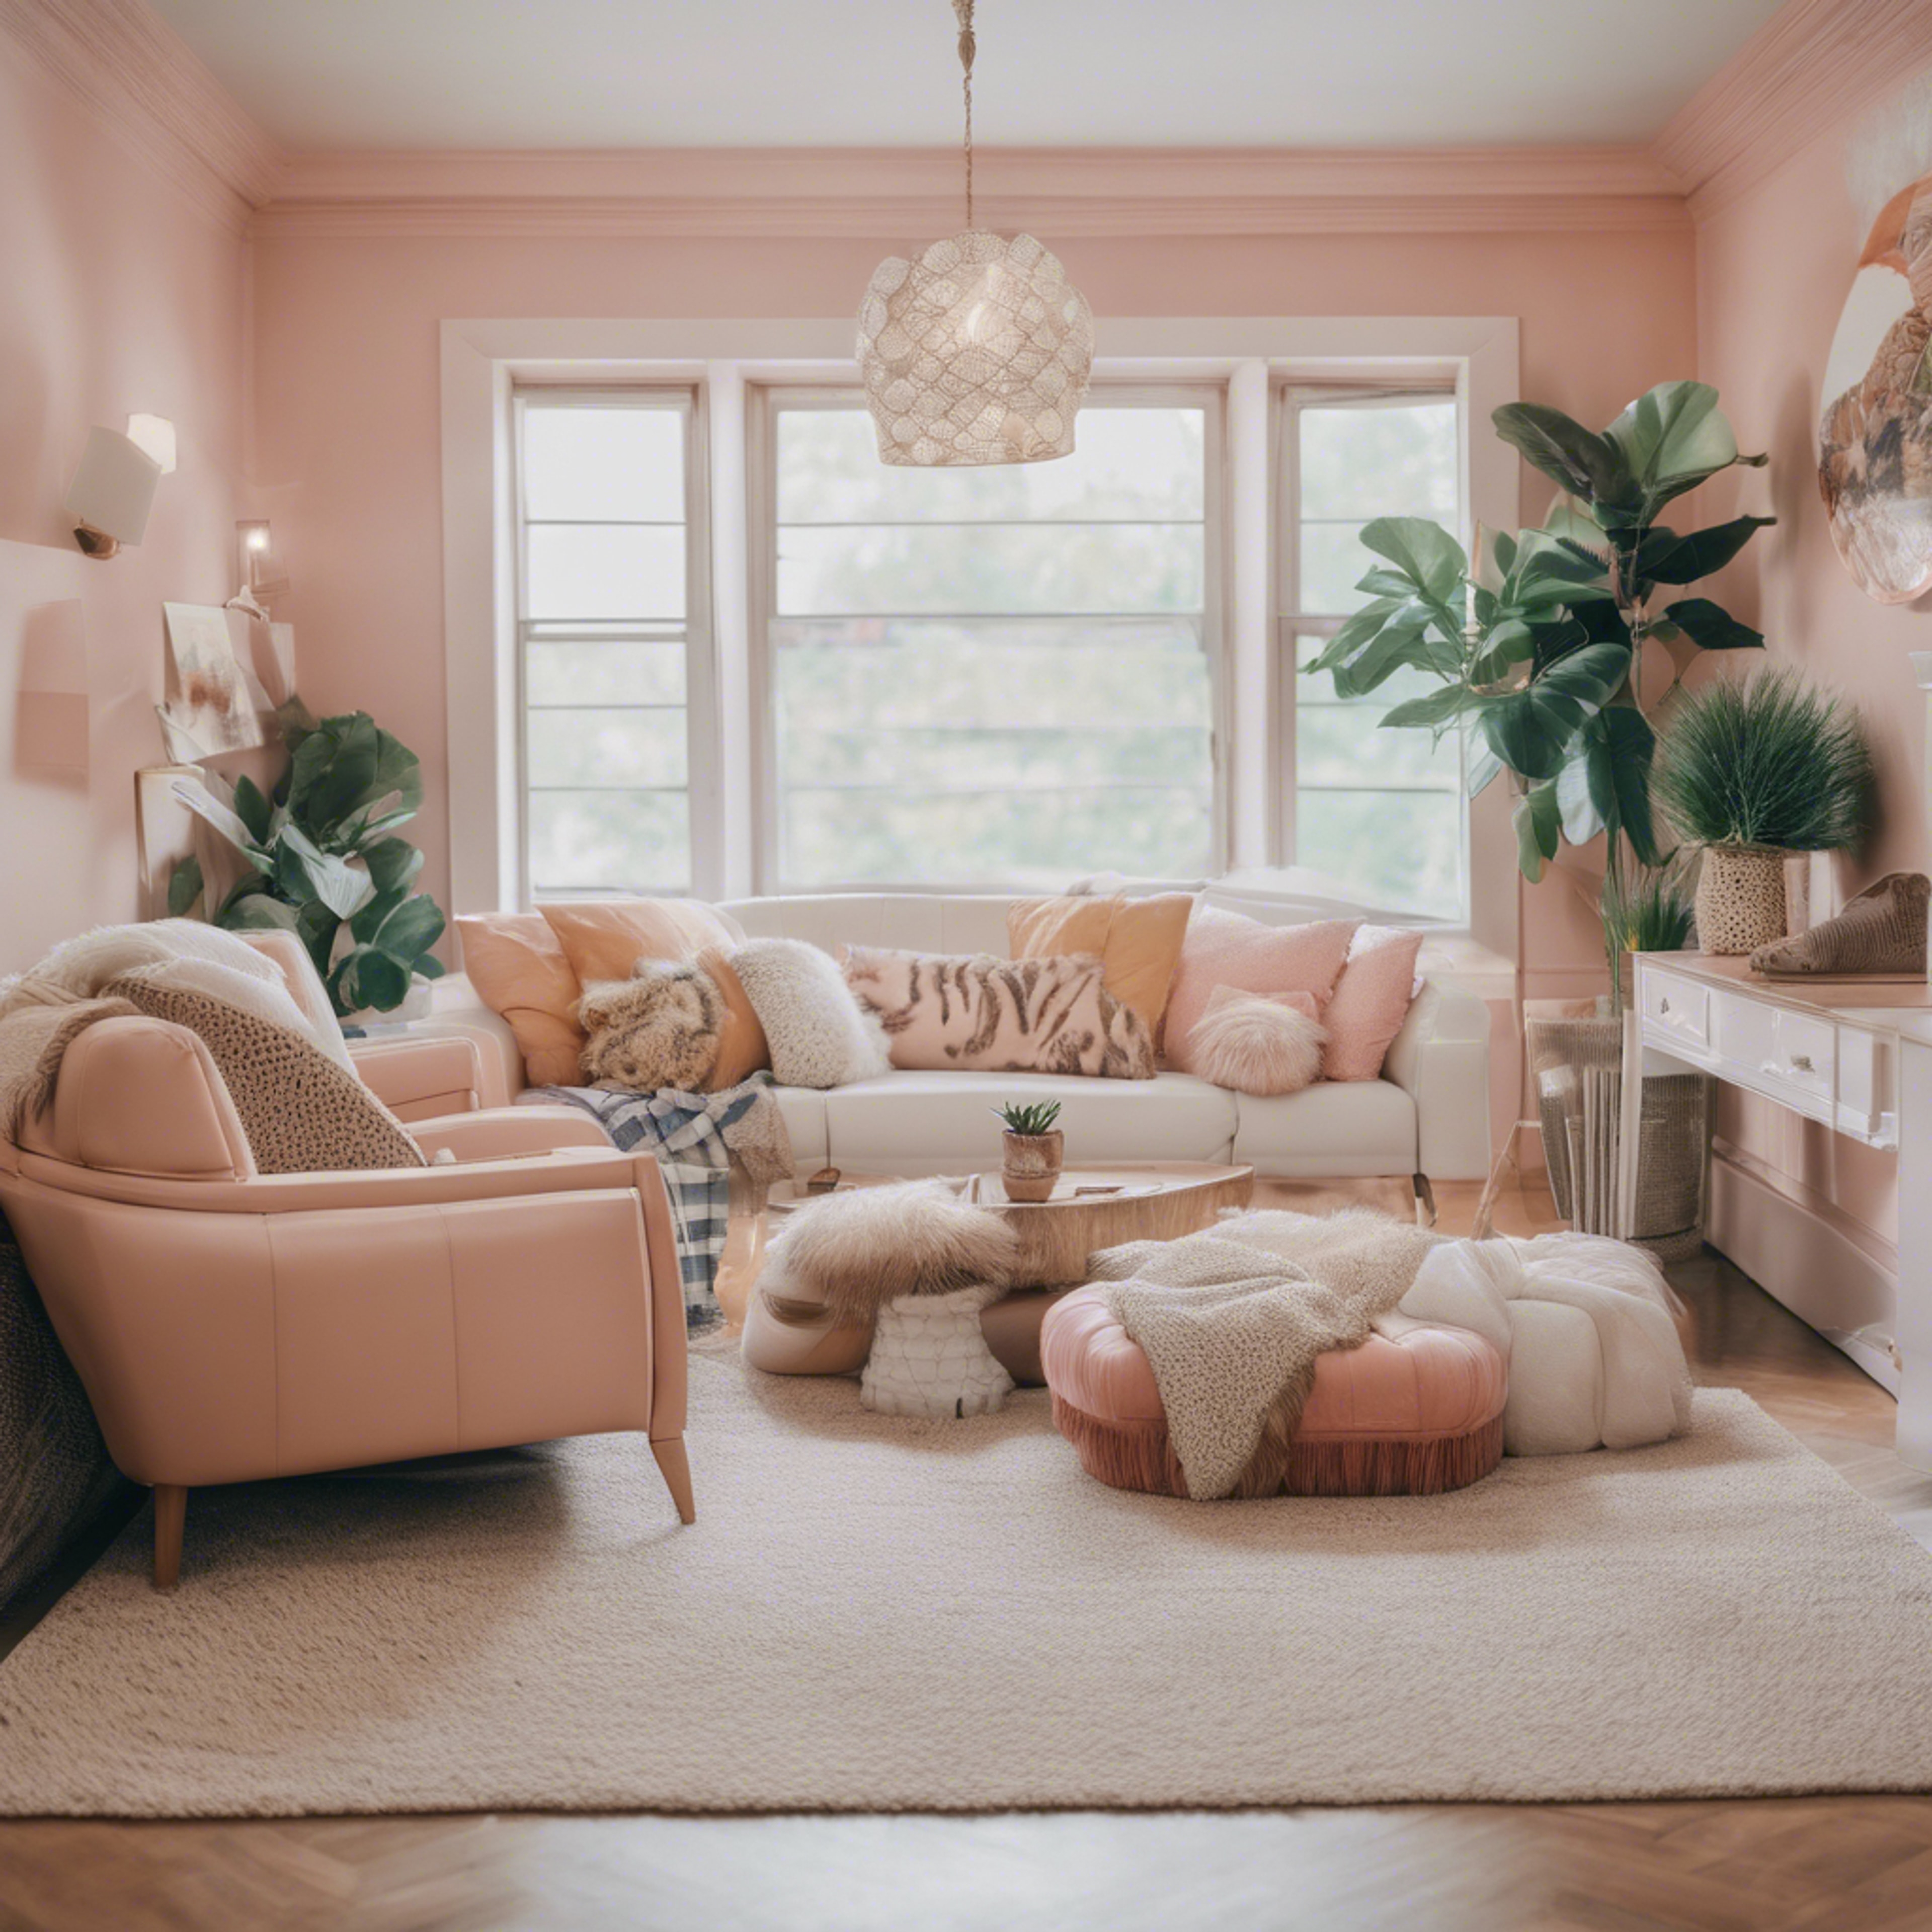 A tastefully decorated preppy aesthetic interior with animal prints, plaids, and pastel colors. Wallpaper[013da7e2e0464972ad87]